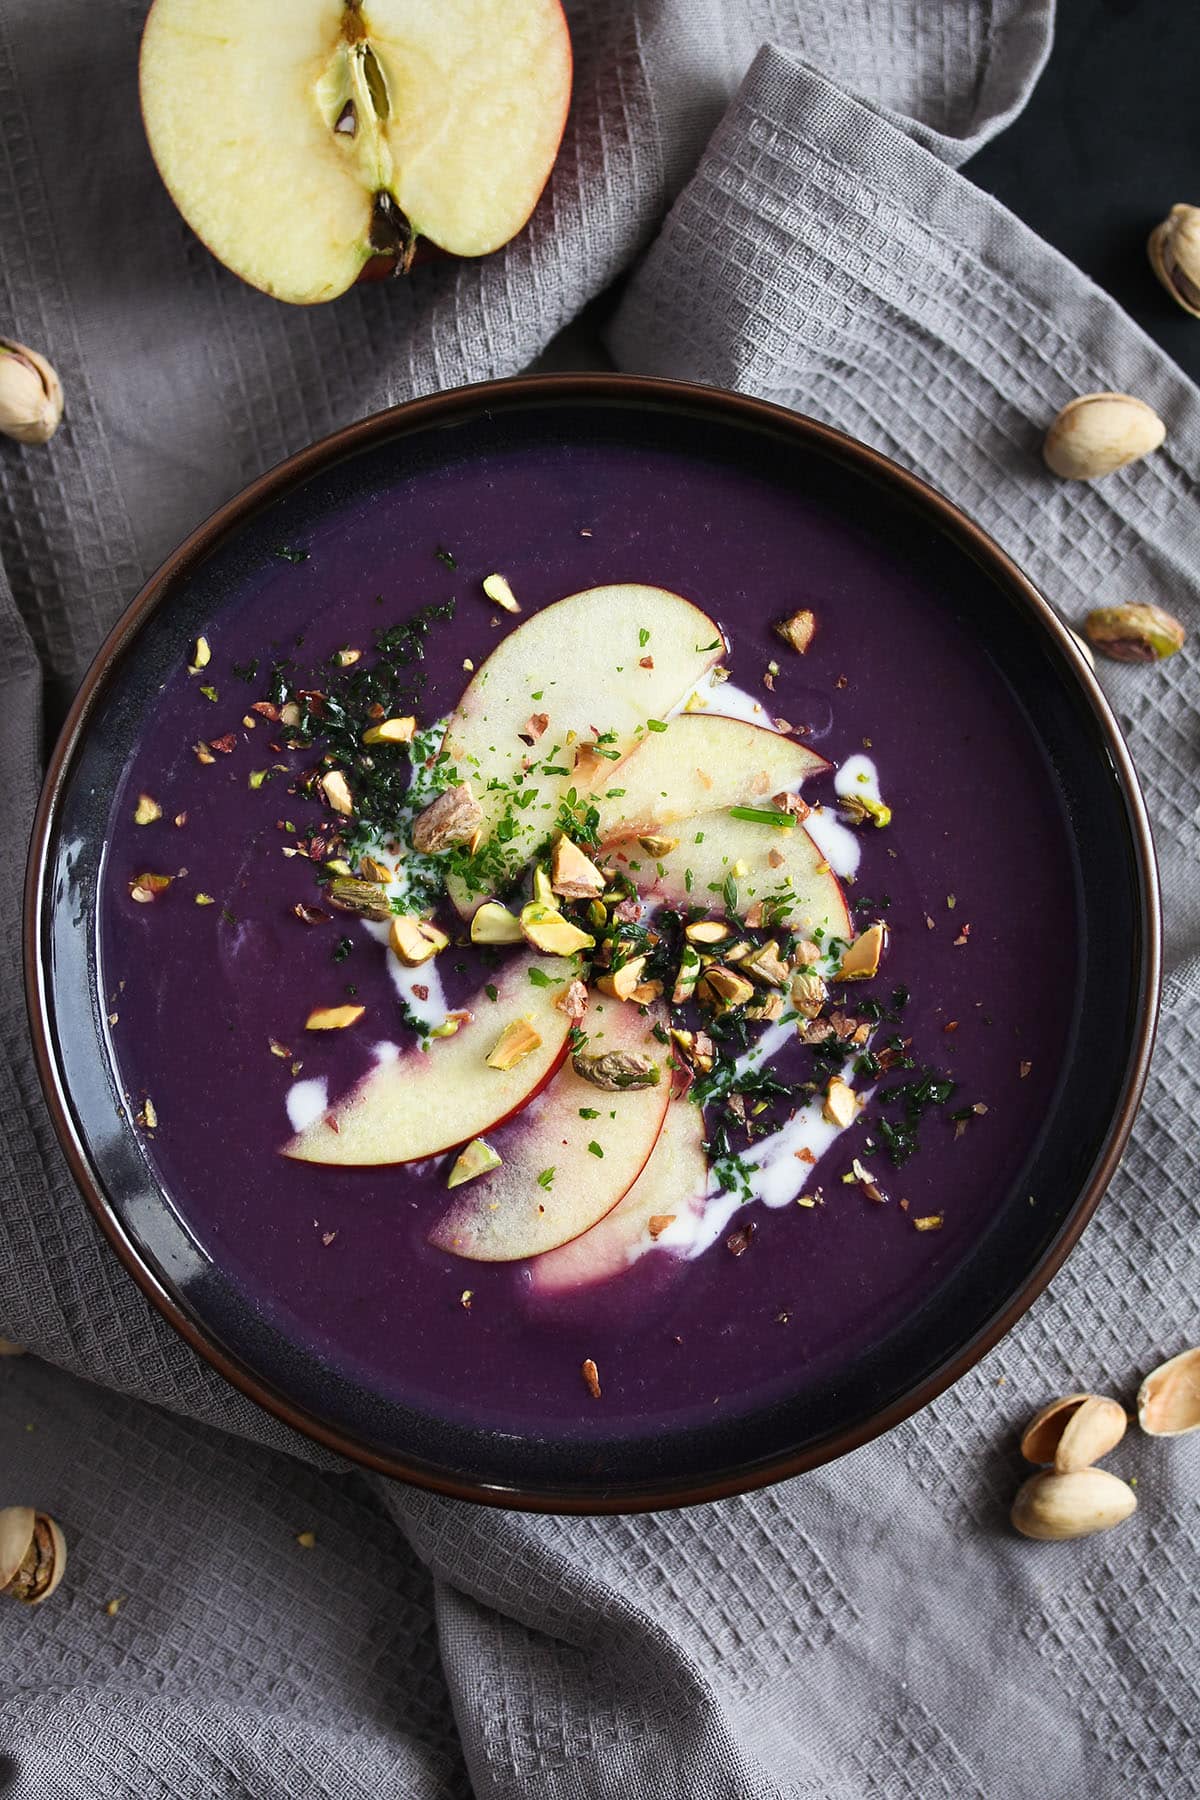 soup with red cabbage in a bowl, half an apple on the side.